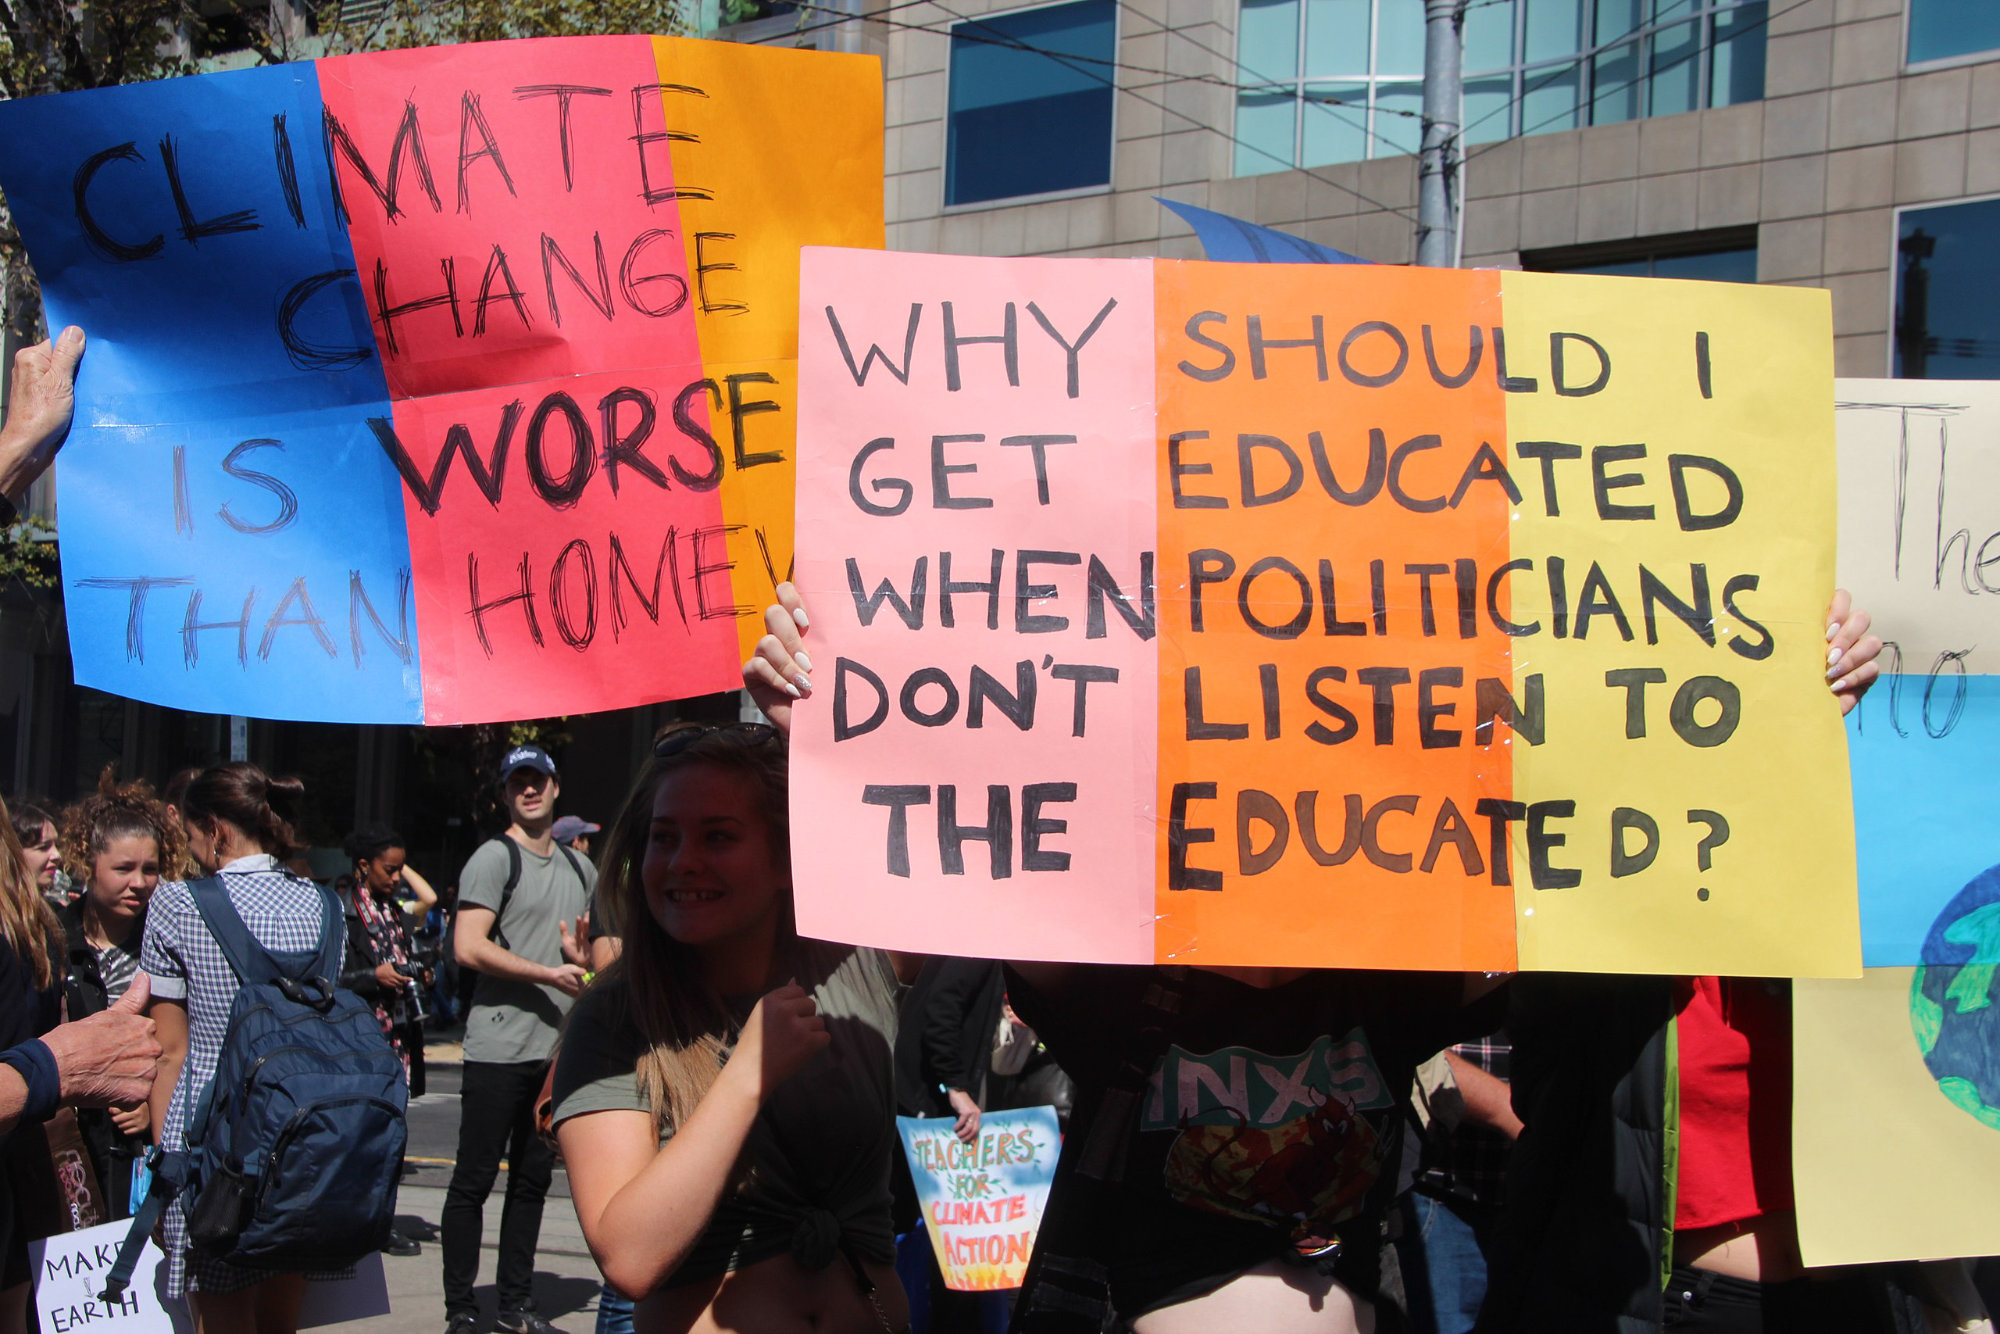 Photo of people carrying signs during a protest march.